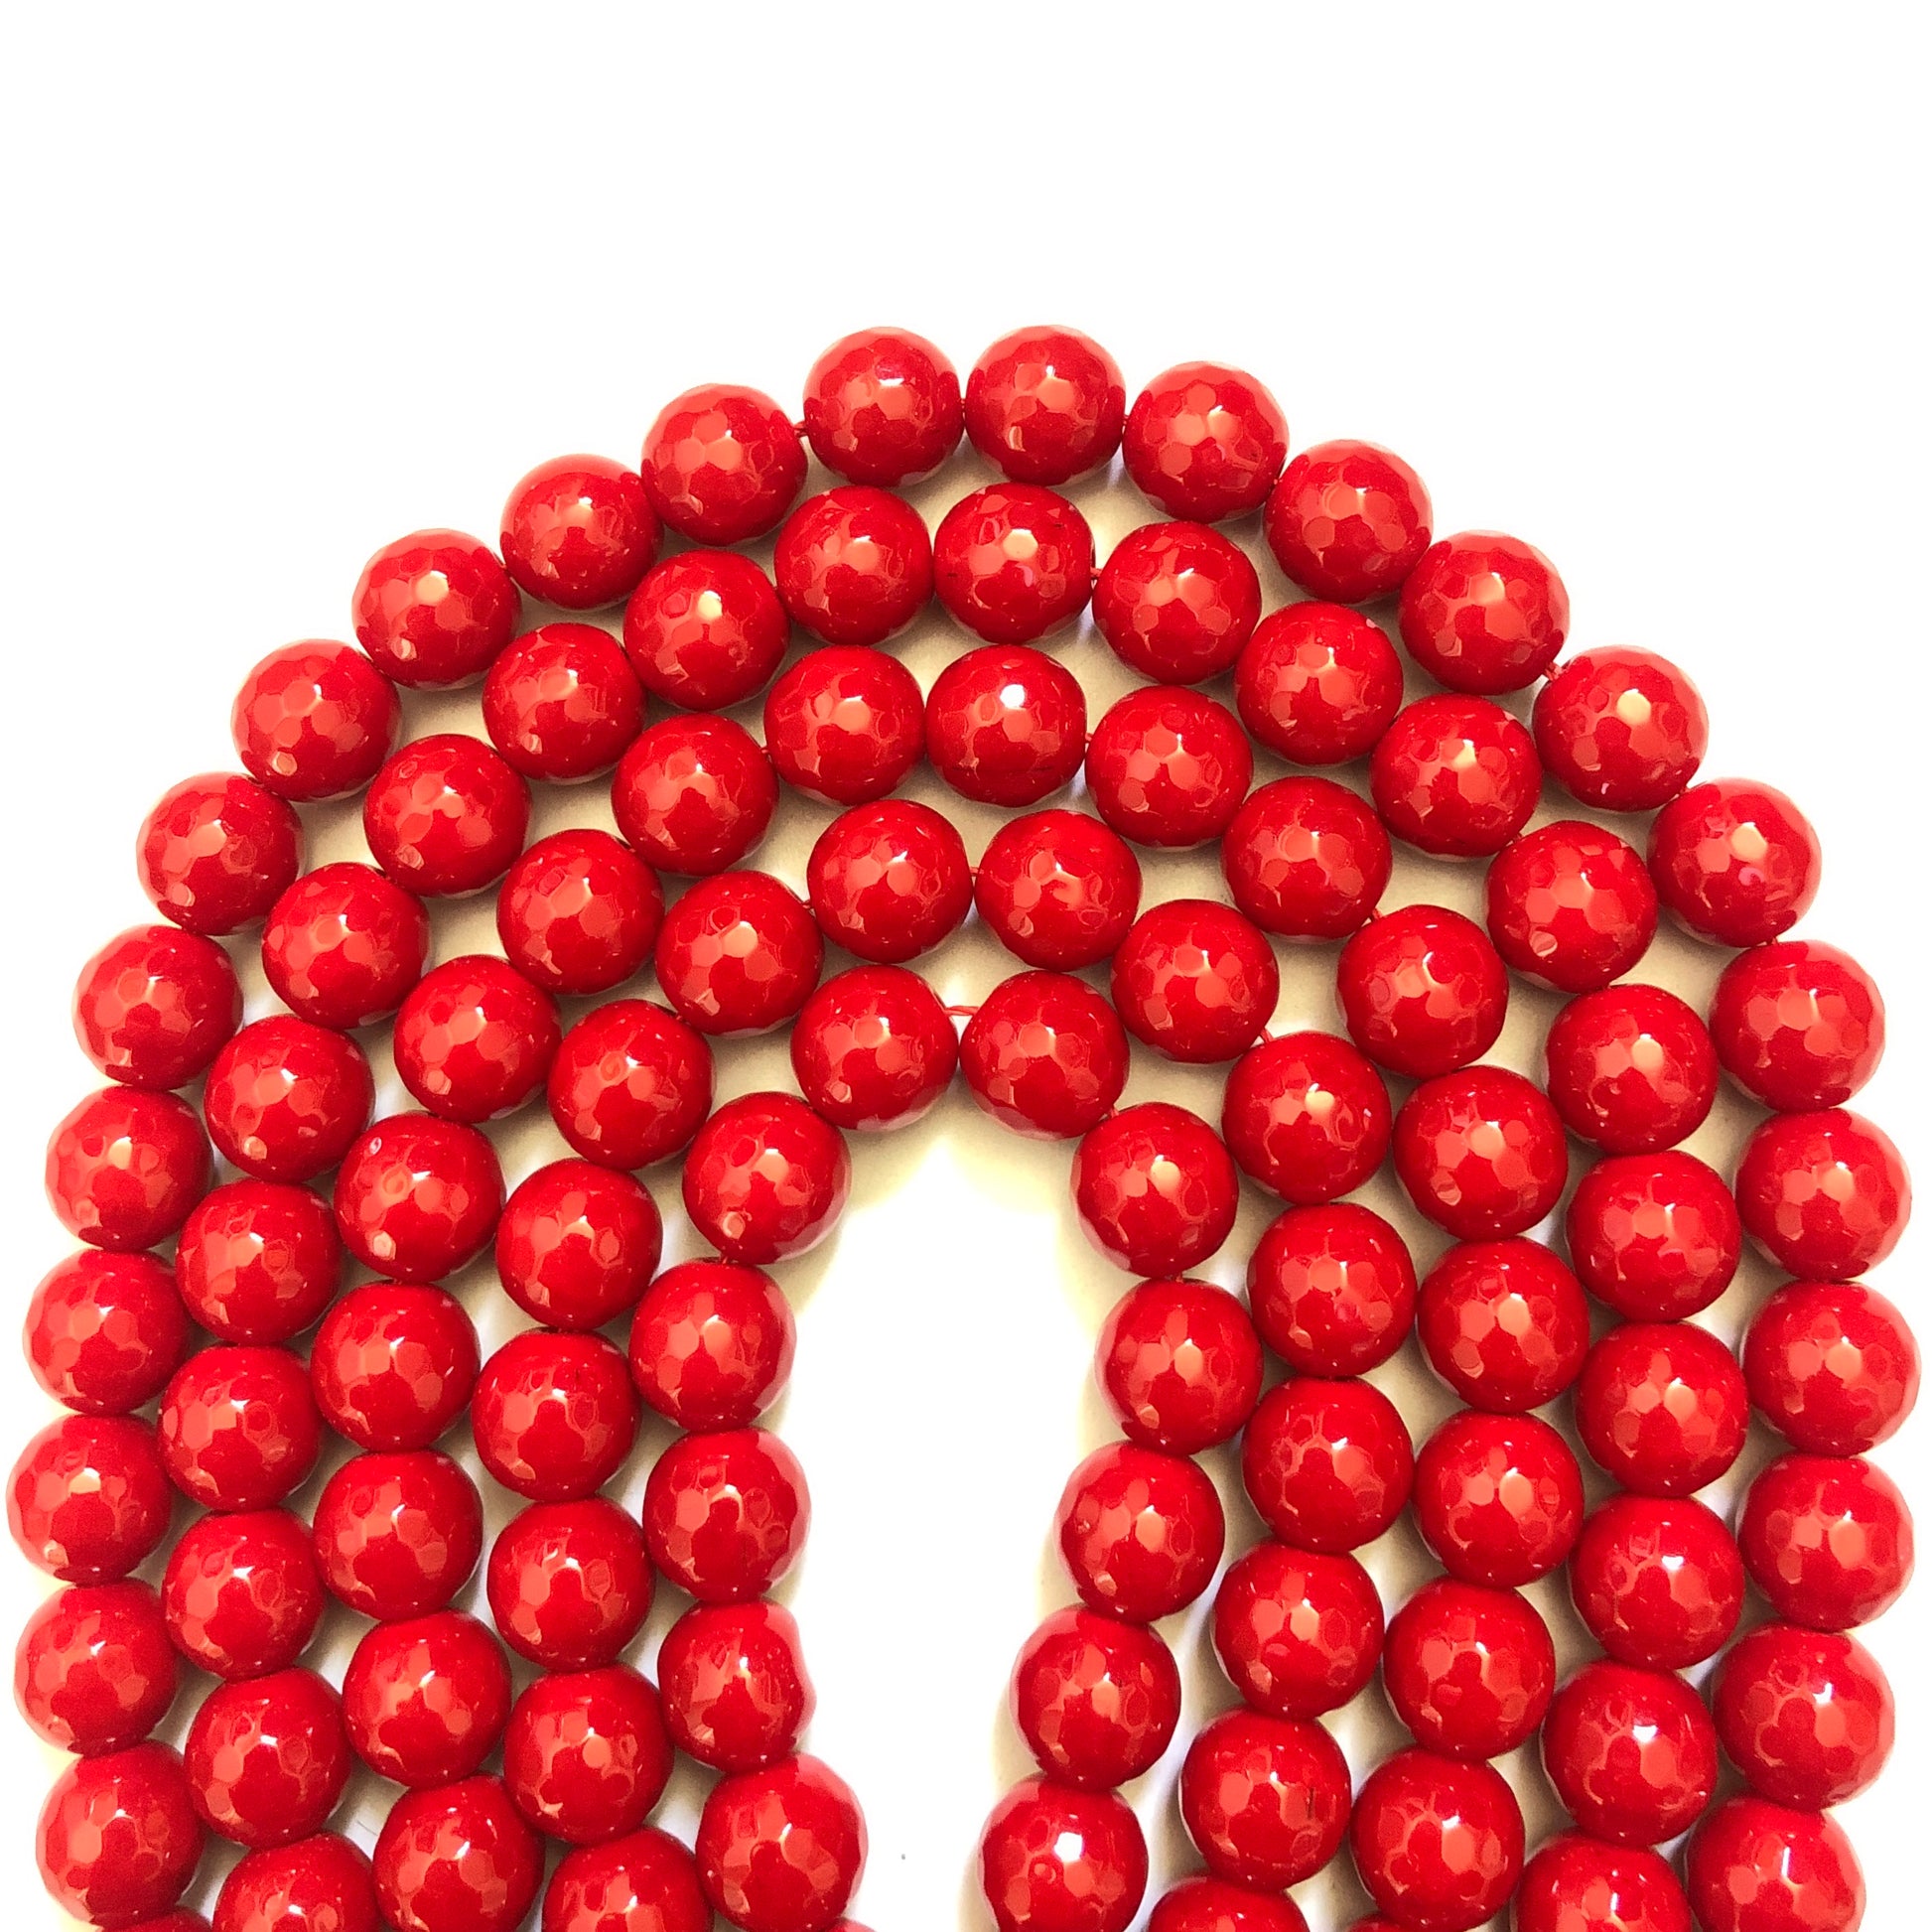 2 Strands/lot 12mm Red Faceted Jade Stone Beads Stone Beads 12mm Stone Beads Faceted Jade Beads New Beads Arrivals Charms Beads Beyond